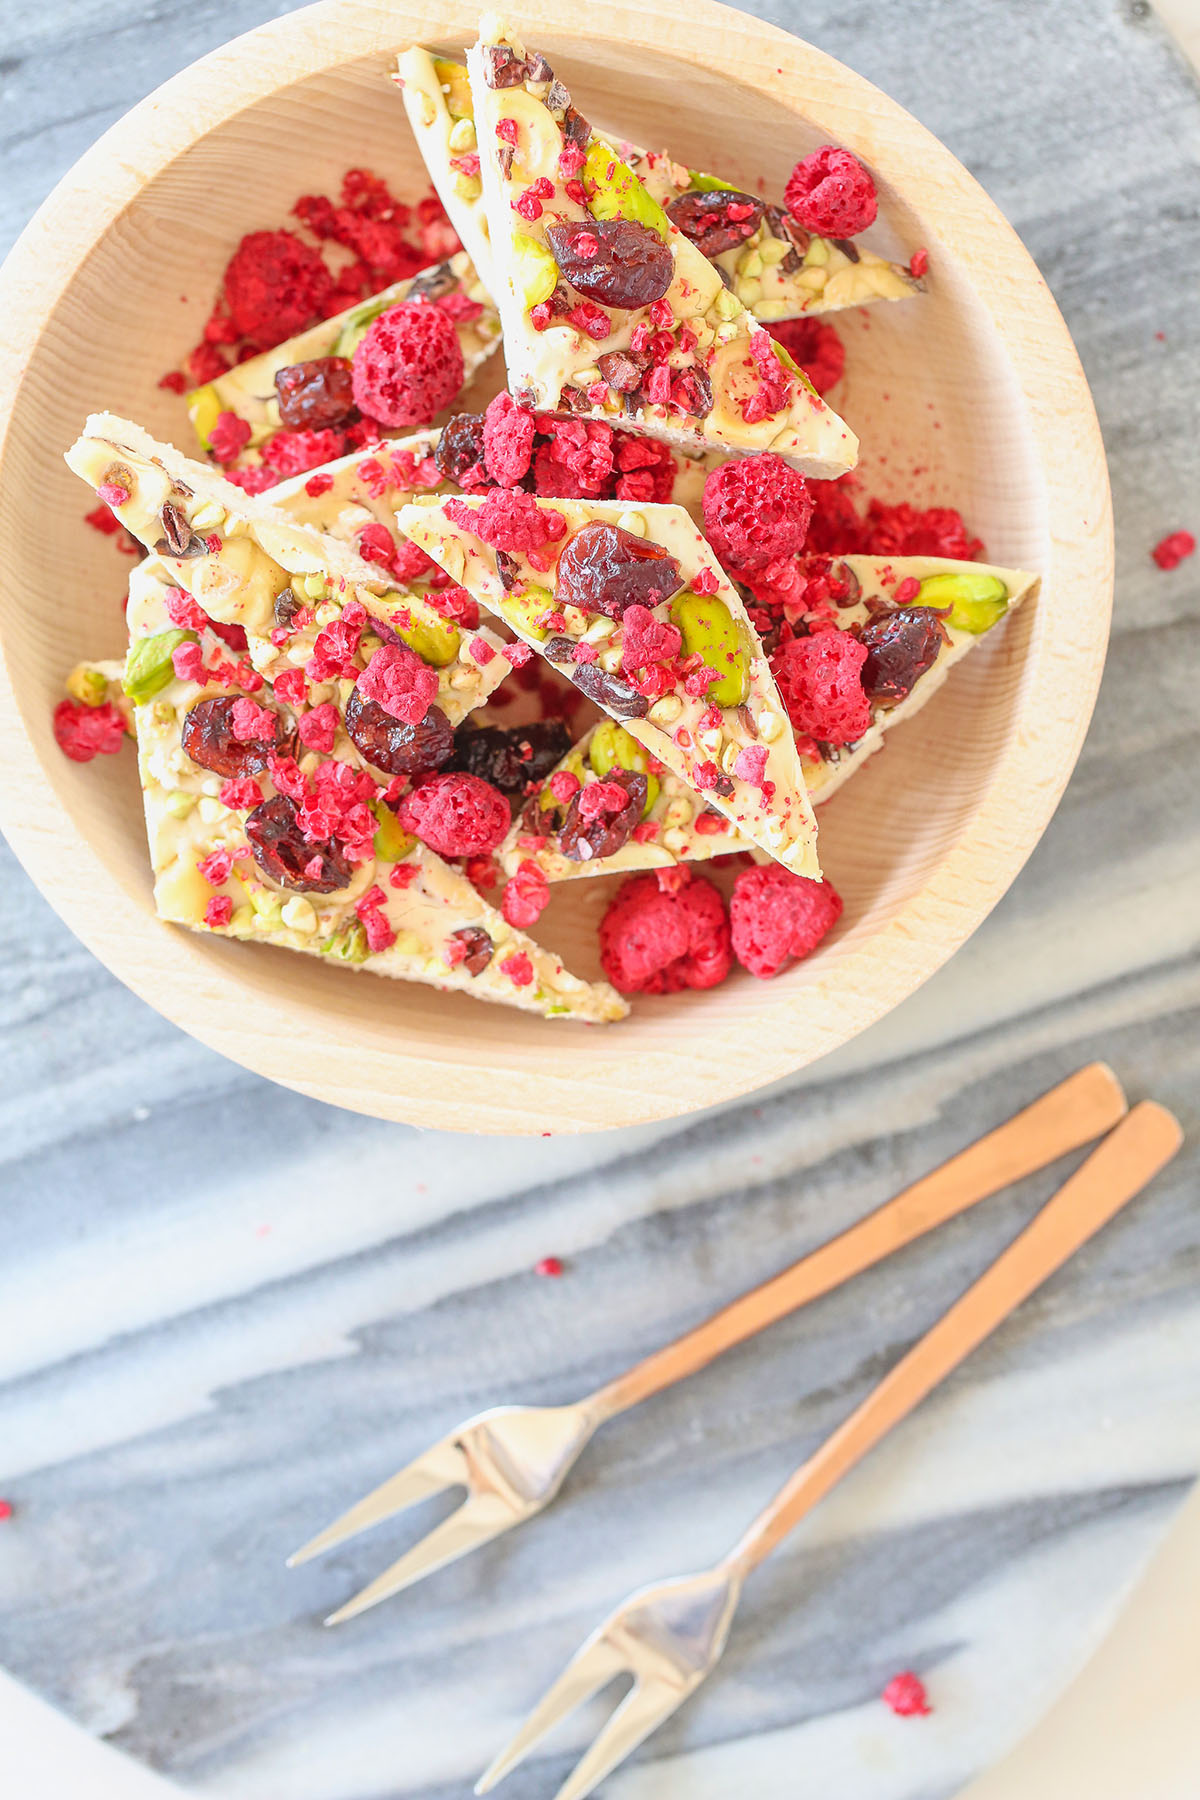 Were you a mad Milky bar fan when you were a kid? I’ve got my hands up! So now, this – a dairy & refined sugar free version, so you can satisfy those white choc cravings without the nasties. Also – 7 ingreds, 1 step, & perfect for making with the kiddos! Vegan, GF, paleo, keto, low sugar/carb.